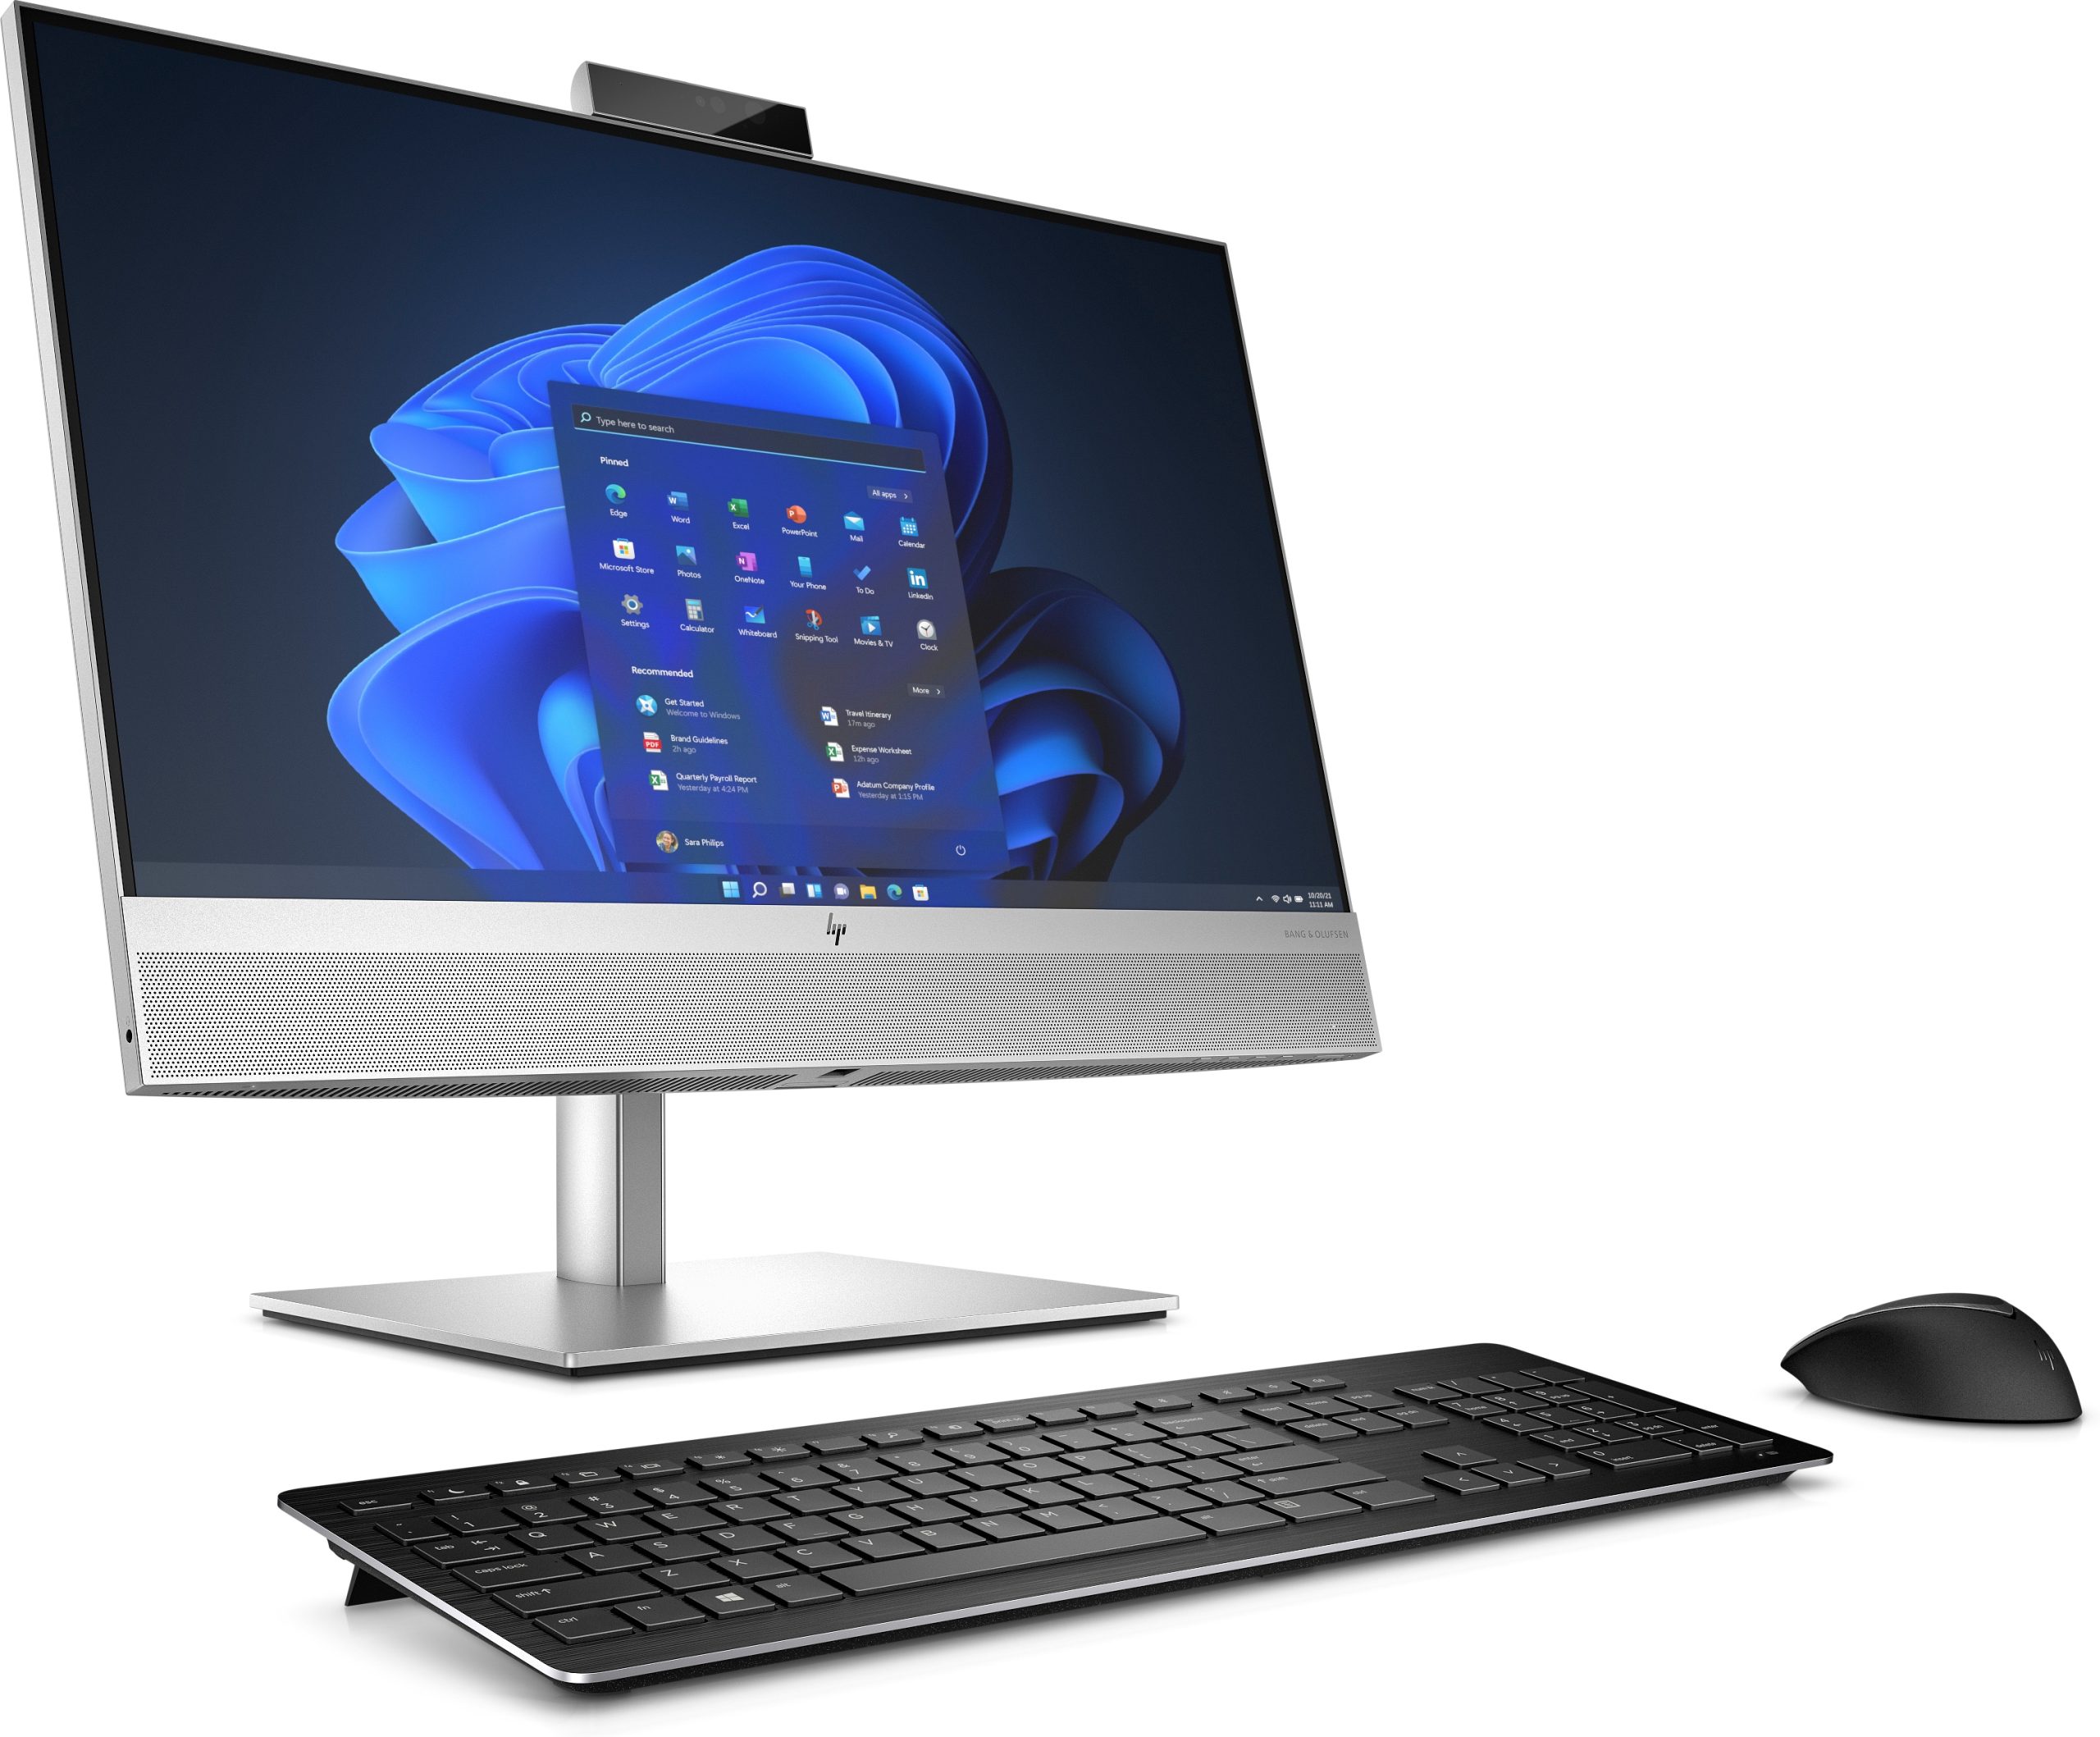 Windows 11 Pro Desktop Computers & All-in-One PCs for Business